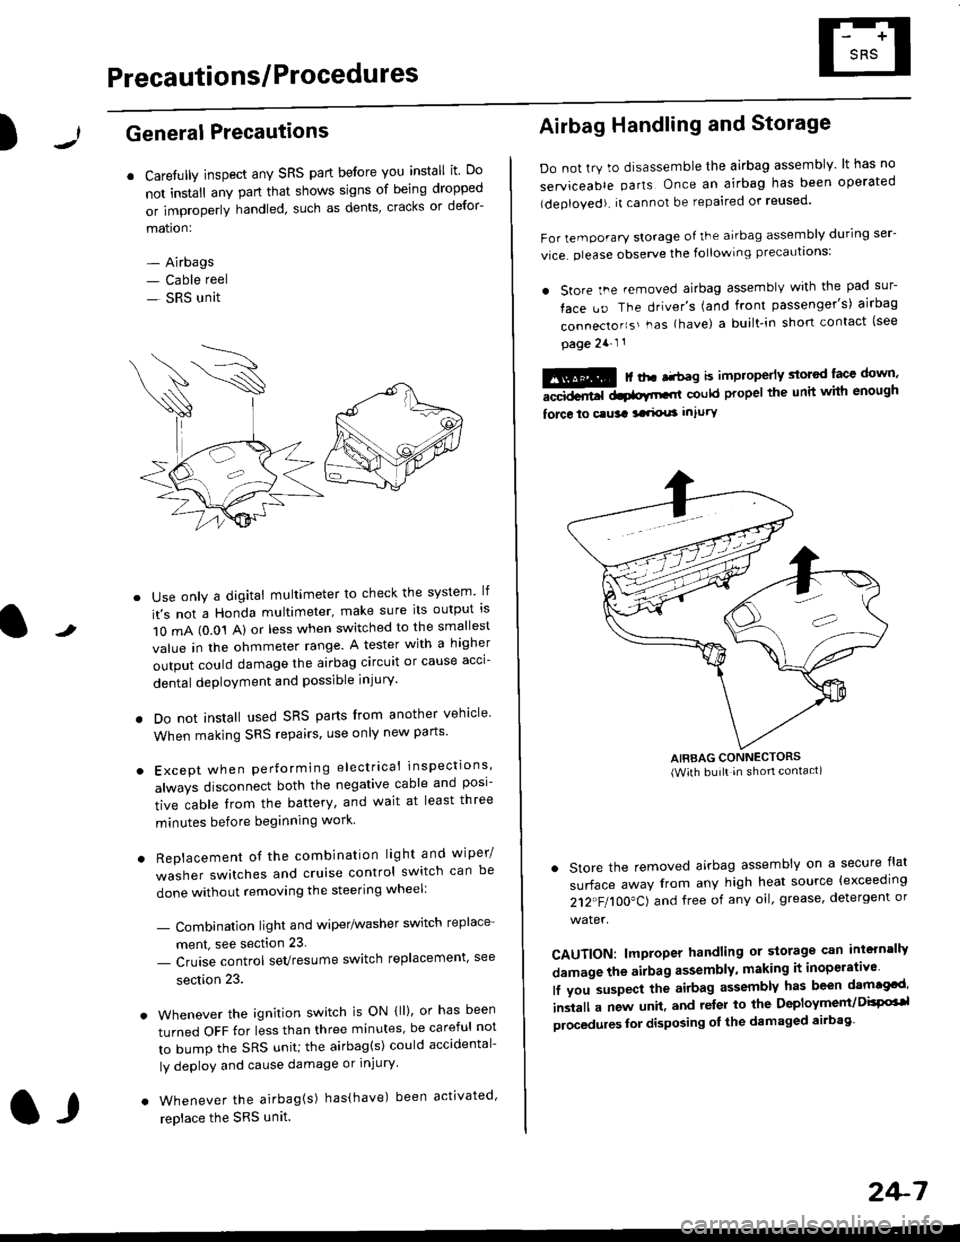 HONDA CIVIC 1999 6.G Workshop Manual Precautions/ Procedures
)General Precautions
r Carefully inspect any SRS part before you install it Do
not install any part that shows signs of being dropped
or improperly handled such as dents, crac